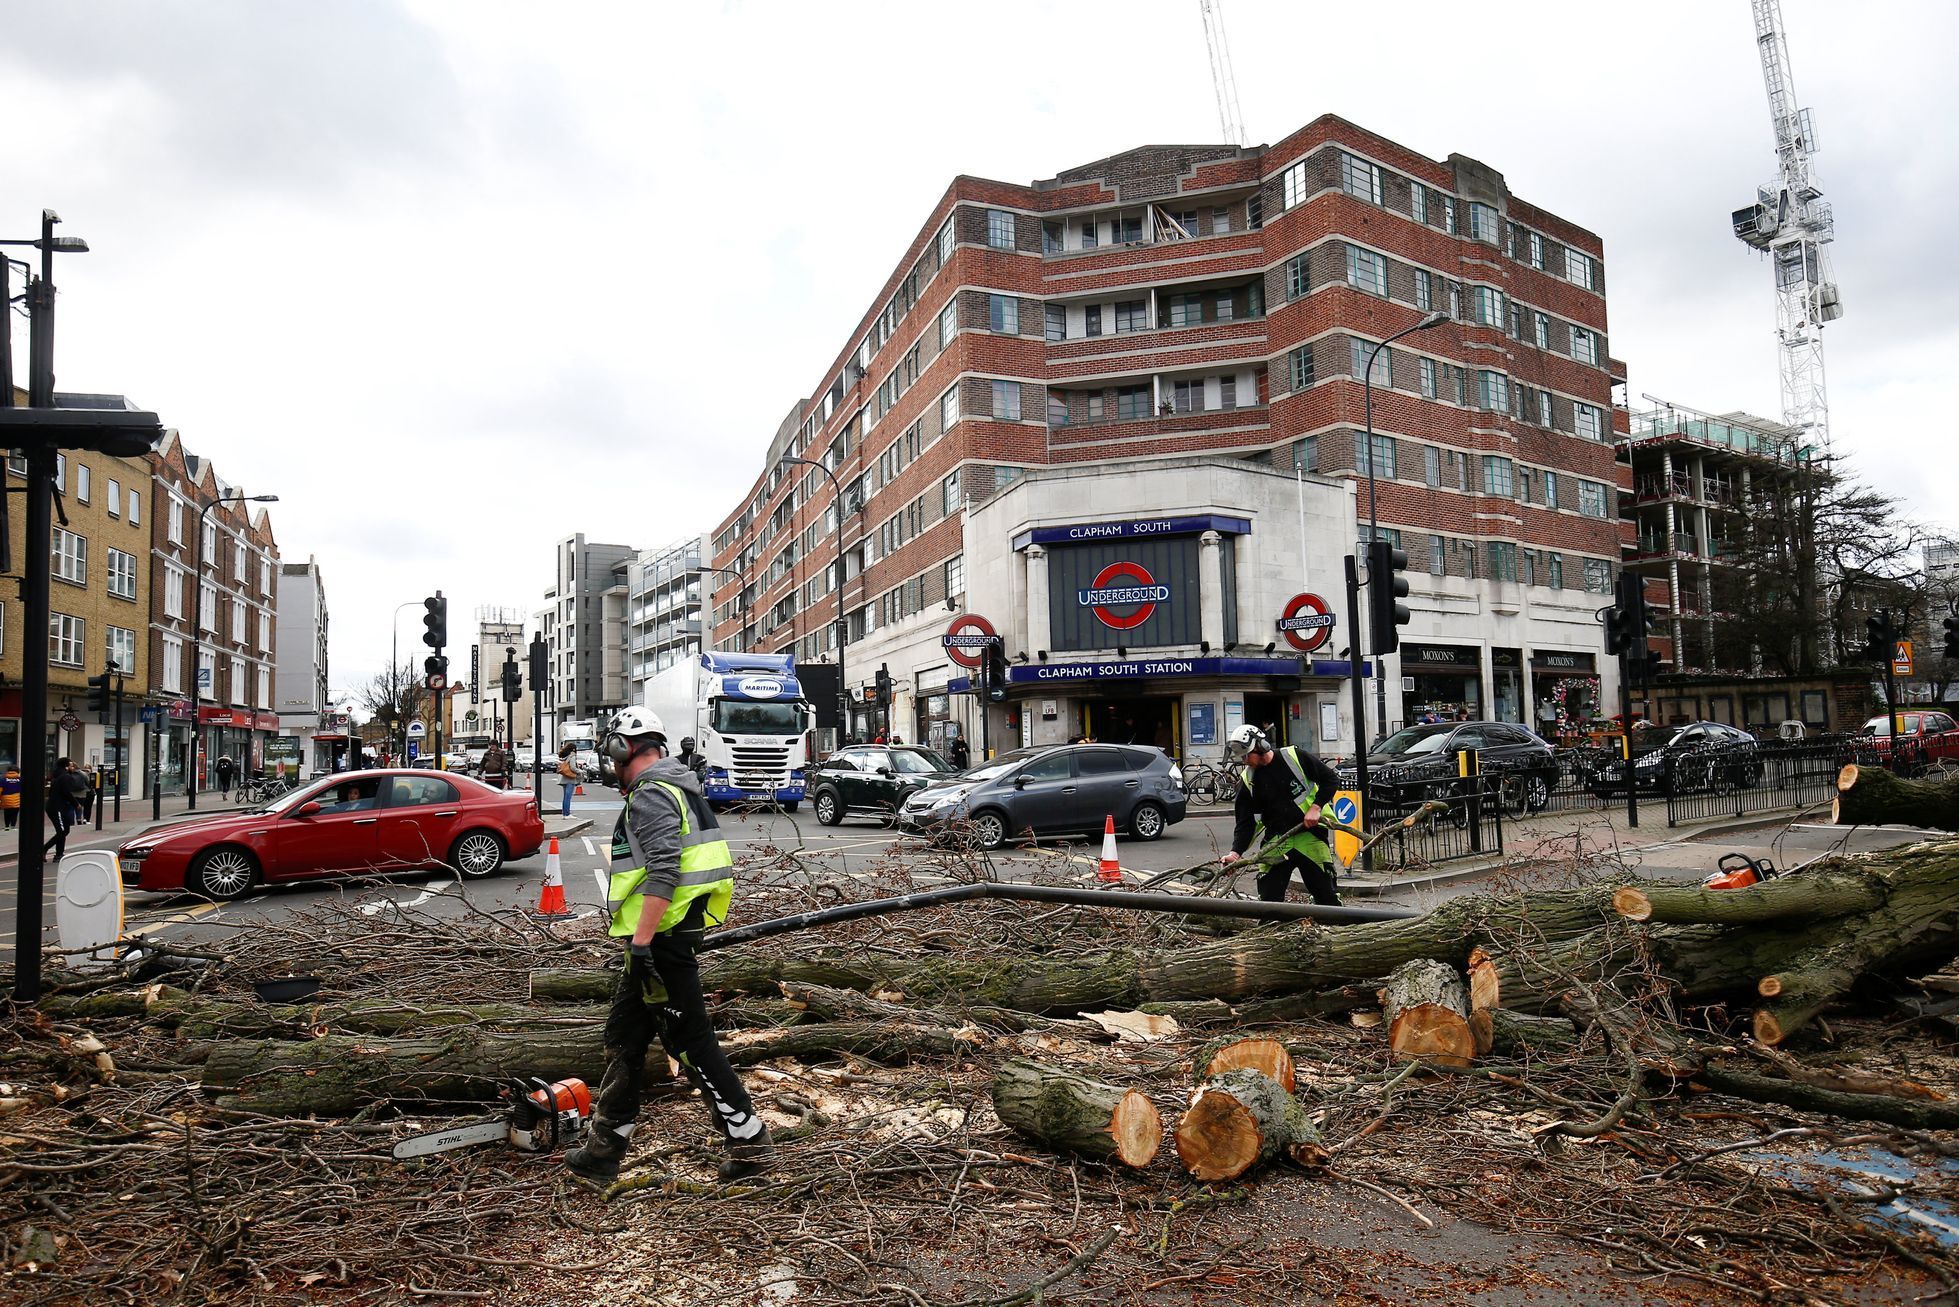 Workers remove a tree lying across a road after it was blown over by high winds, in London